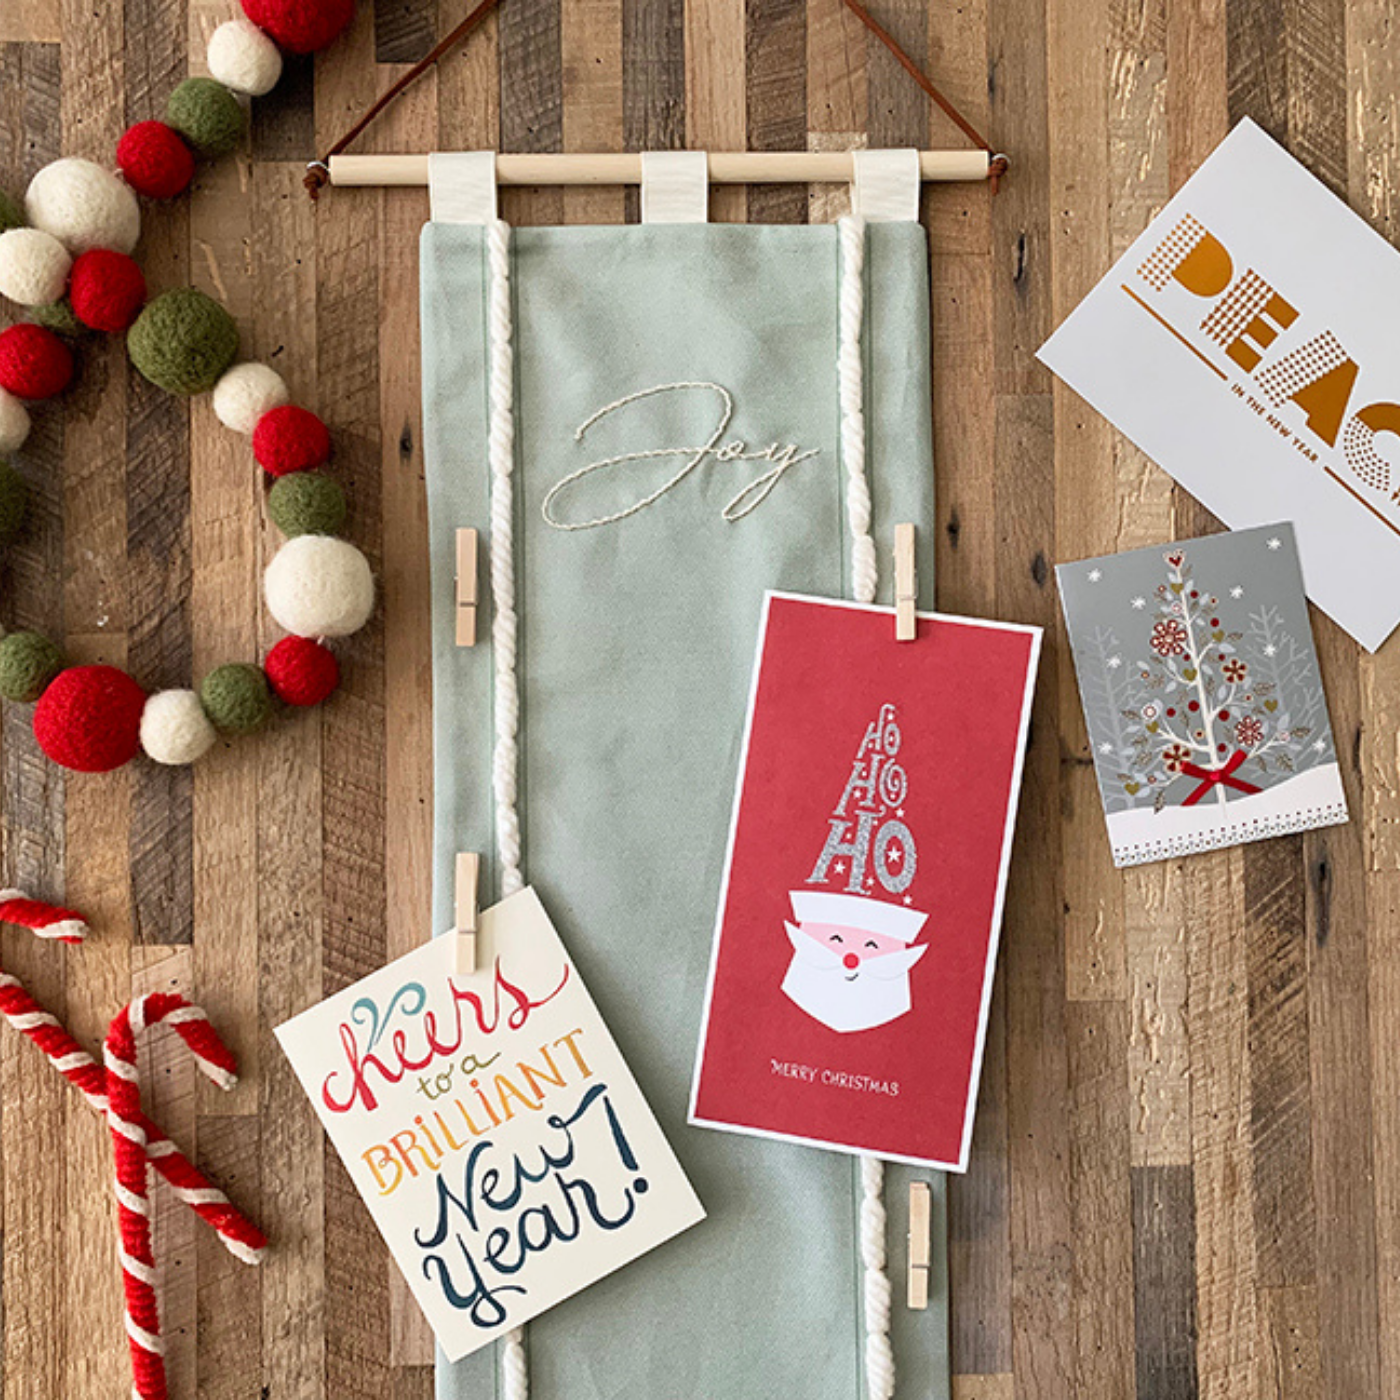 A fabric holiday card holder, which is sage green with the word Joy in white cursive font embroidered on it, has cheery holiday cards, one with the face of Santa Claus and another that says “Cheers for a Brilliant New Year!” in cursive red, yellow, green and blue, clipped to it with small wooden clothes pins. The card holder is encircled by various holiday things: red-and-white-fabric candy canes at the bottom left; red, cream and green felt garland at the top left; and a few holiday cards on the top right, one with a Christmas tree design and one with the word “PEACE” in red and gold all caps text. The card holder has a wooden dowel rod running at the top of it with brown twine coming up from either side, from which it will hang from the wall.